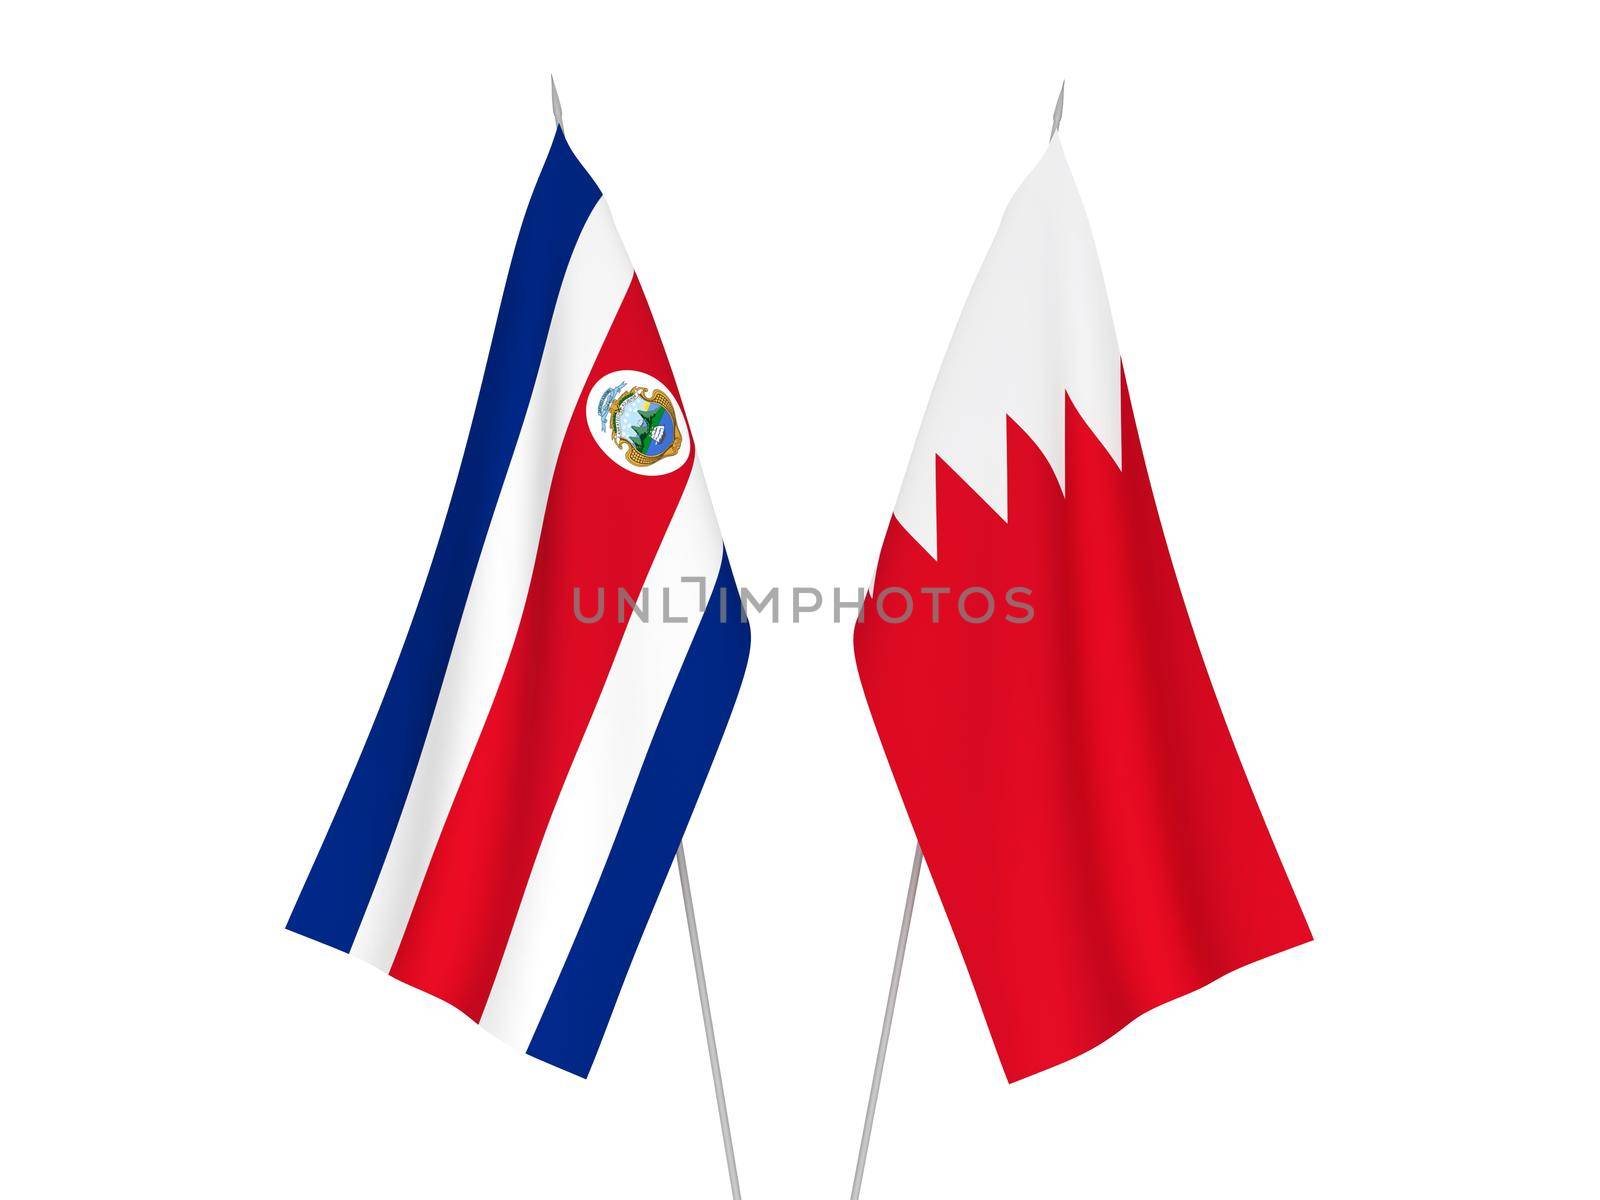 Bahrain and Republic of Costa Rica flags by epic33